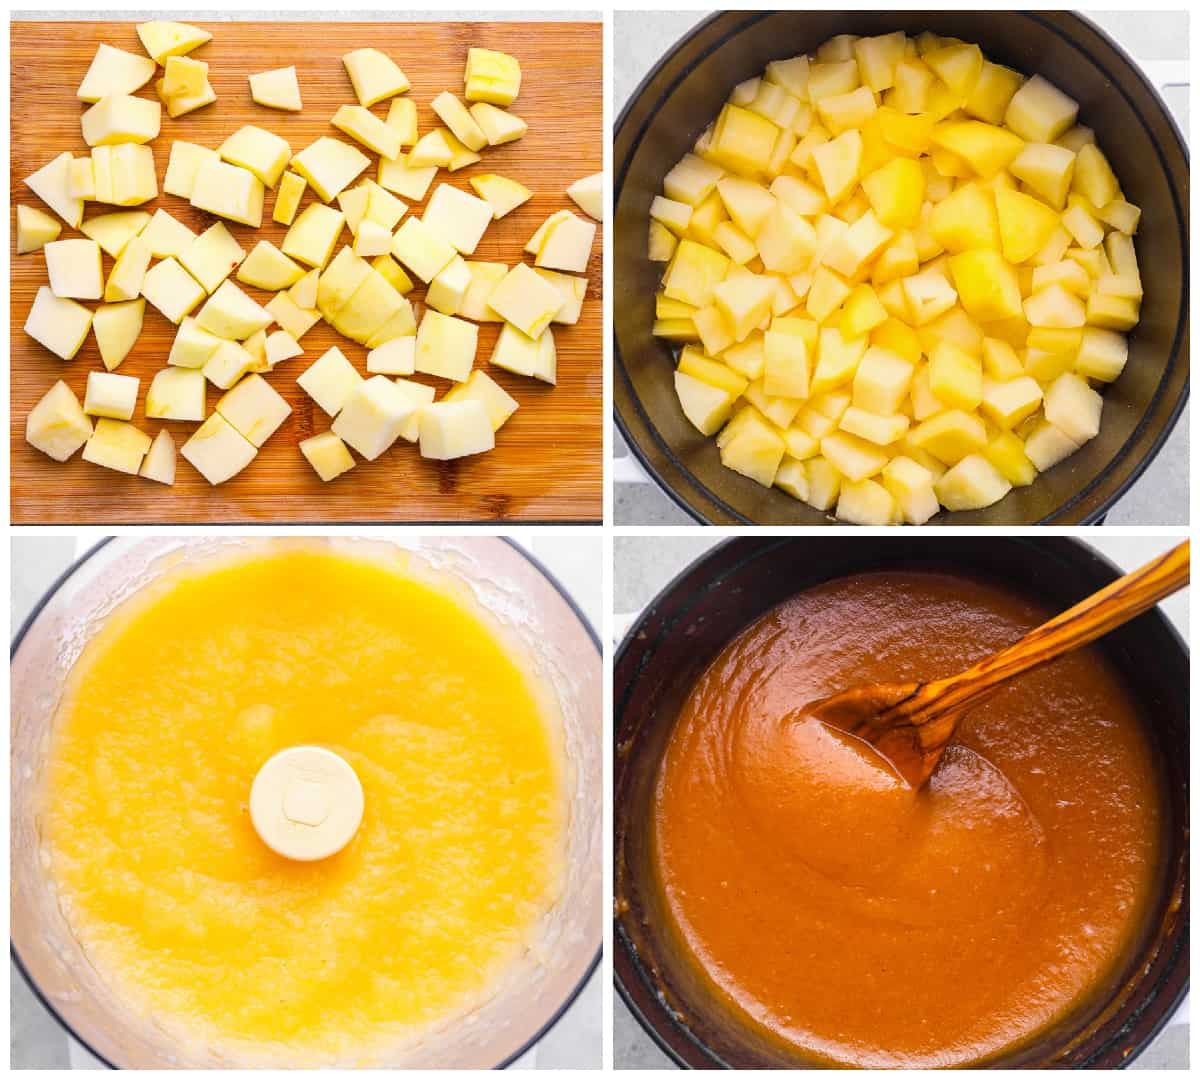 how to make apple butter step by step photo instructions